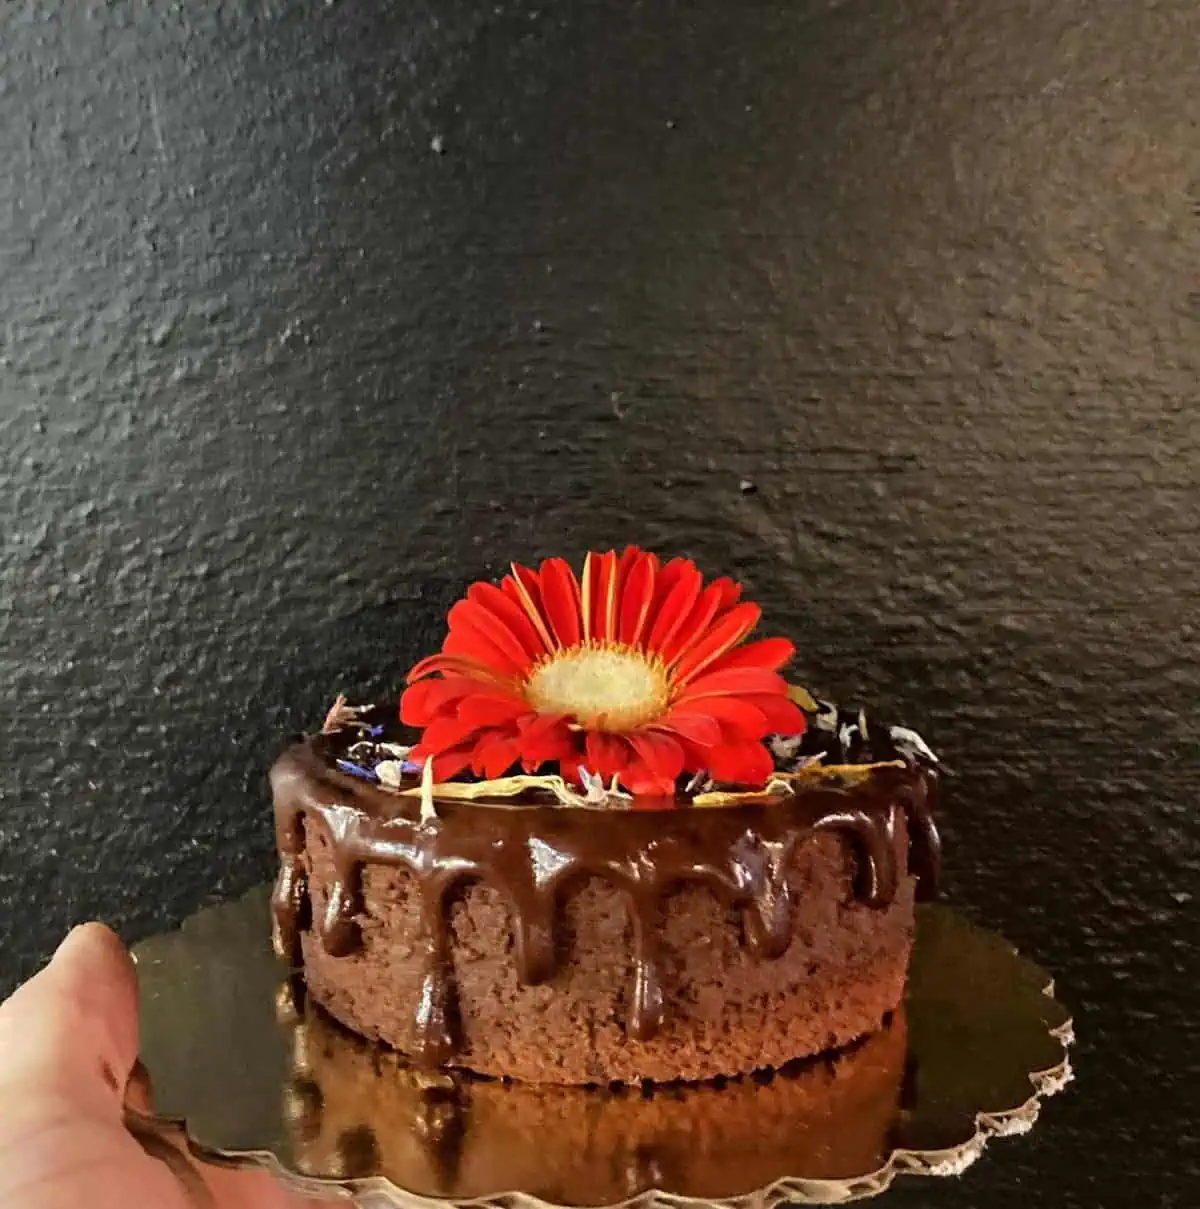 A vegan chocolate cake from Gallivant Coffee in Asheville.